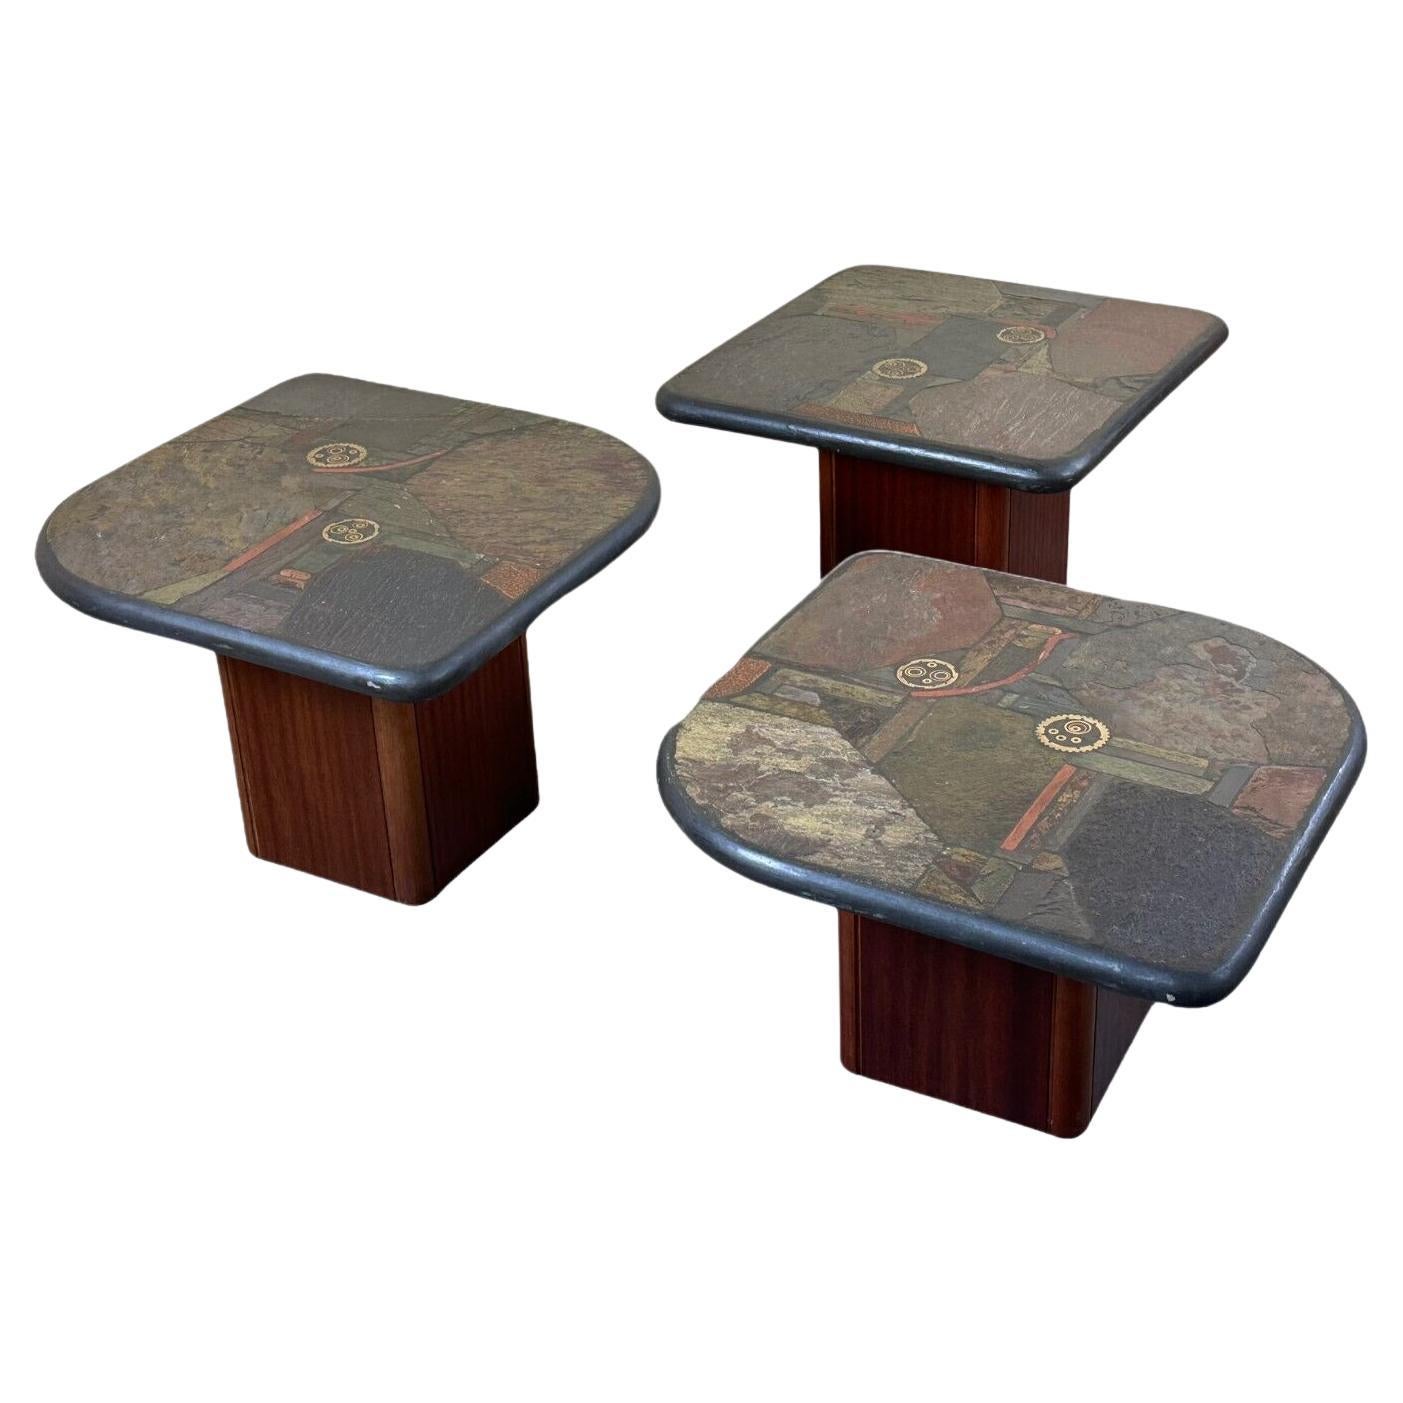 90s set of 3 brutal coffee tables with mosaic by Paul Kingma for Kneip